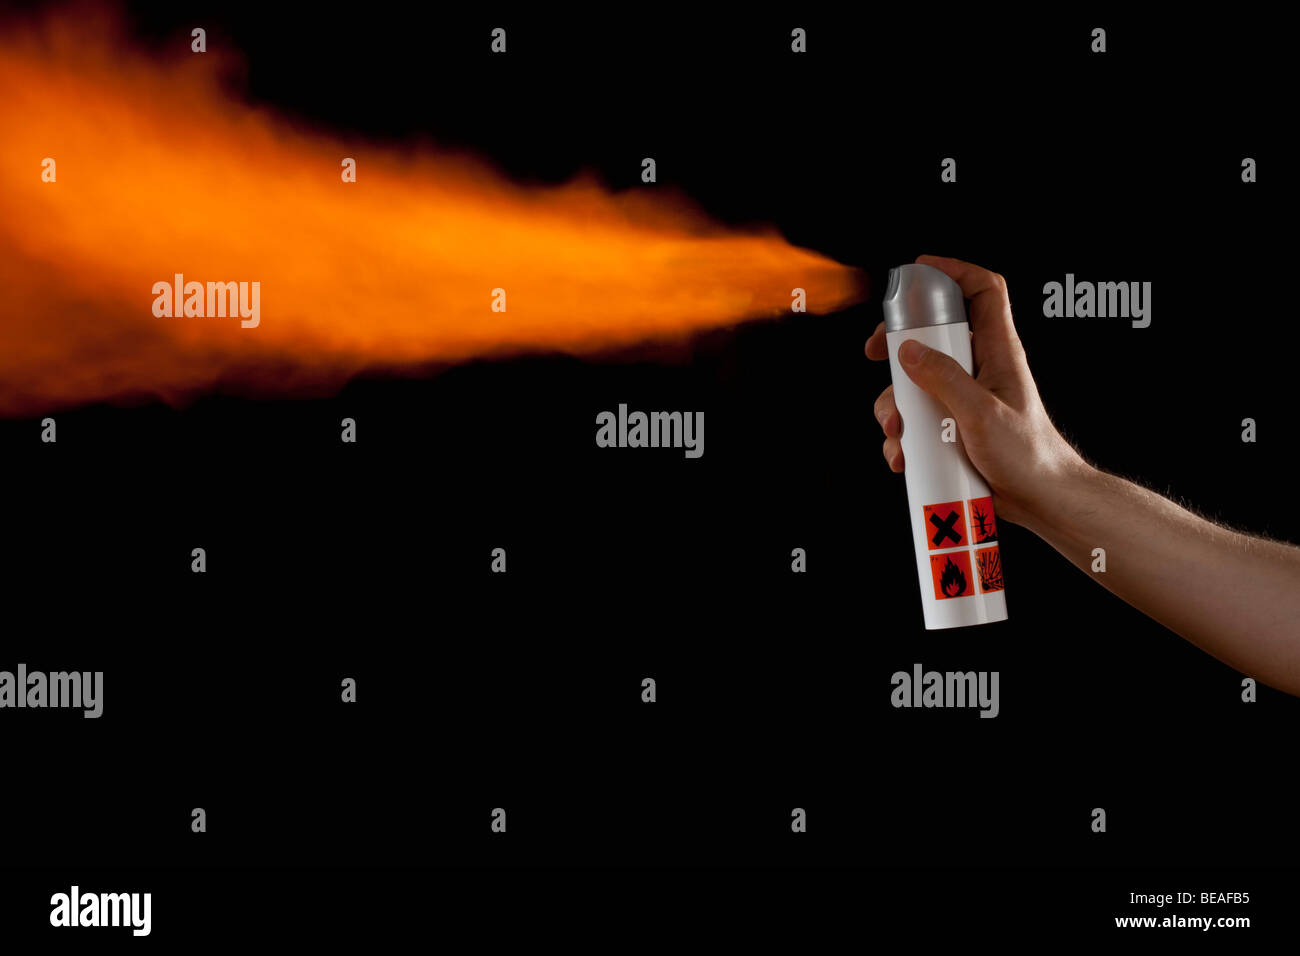 A hand spraying flames from an aerosol can, studio shot Stock Photo